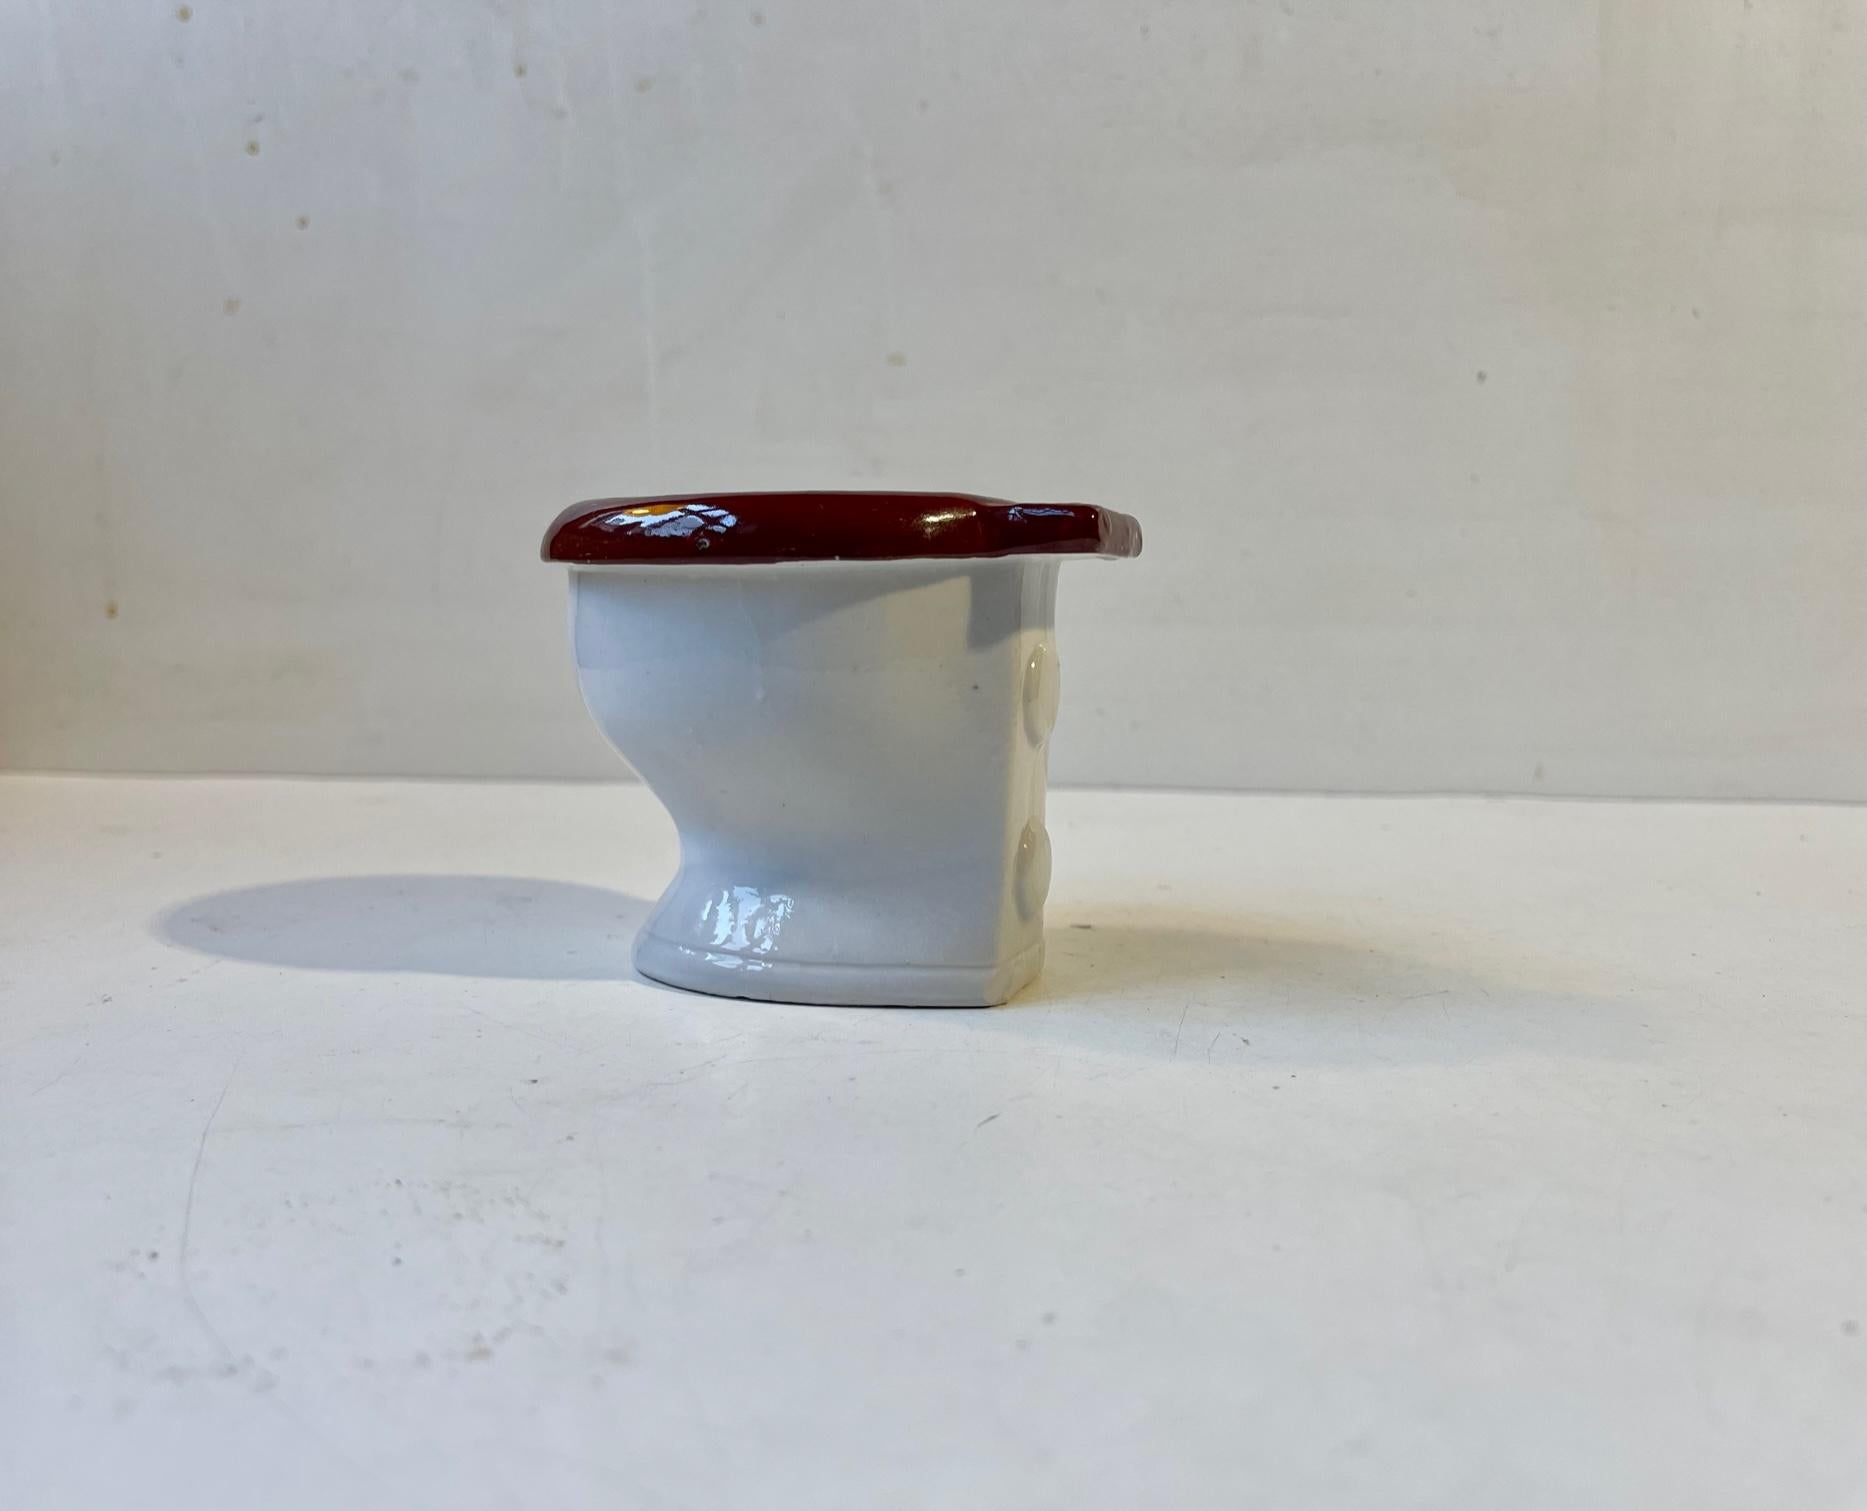 Do an ashtray become political correct when it is shaped as a toilet. Nevertheless this 'piece' was made in West Germany circa 1960-70. It is signed, numbered and measures 8 cm in height with a dept of 10 cm and a width of 8 cm. We recon it has seen